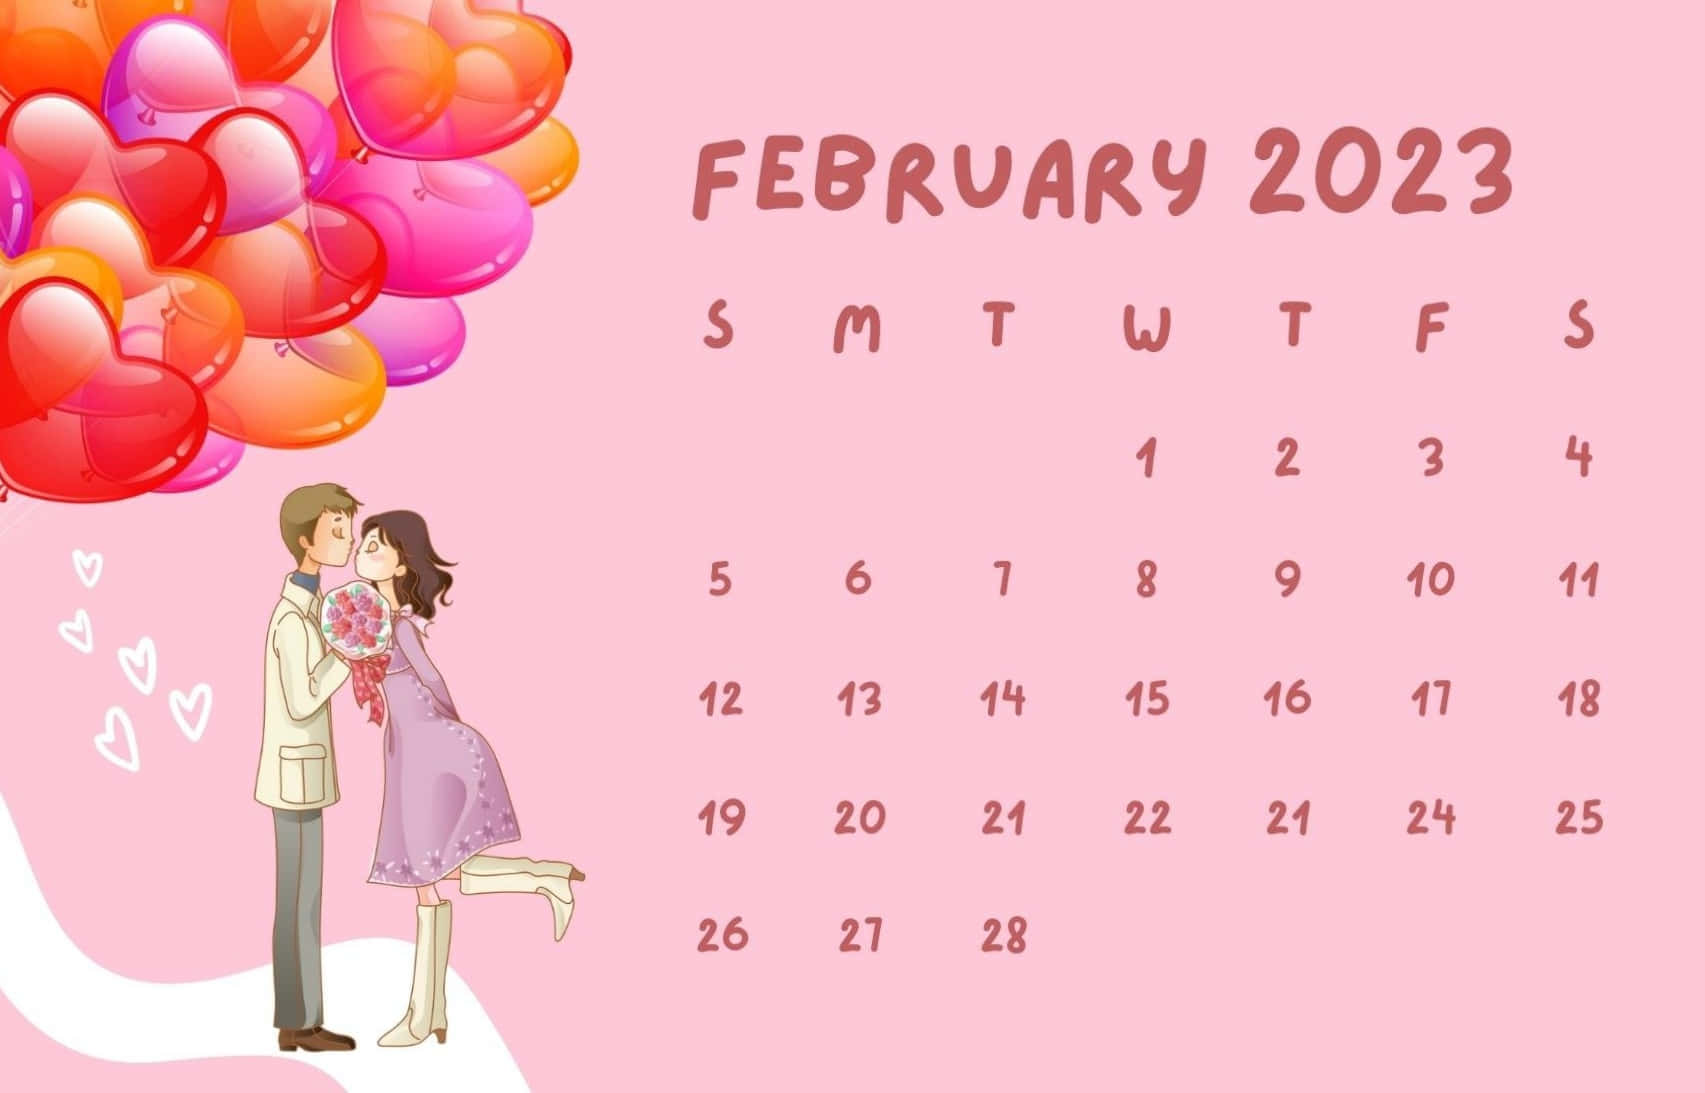 February 2020 Calendar With A Couple Holding Balloons Wallpaper